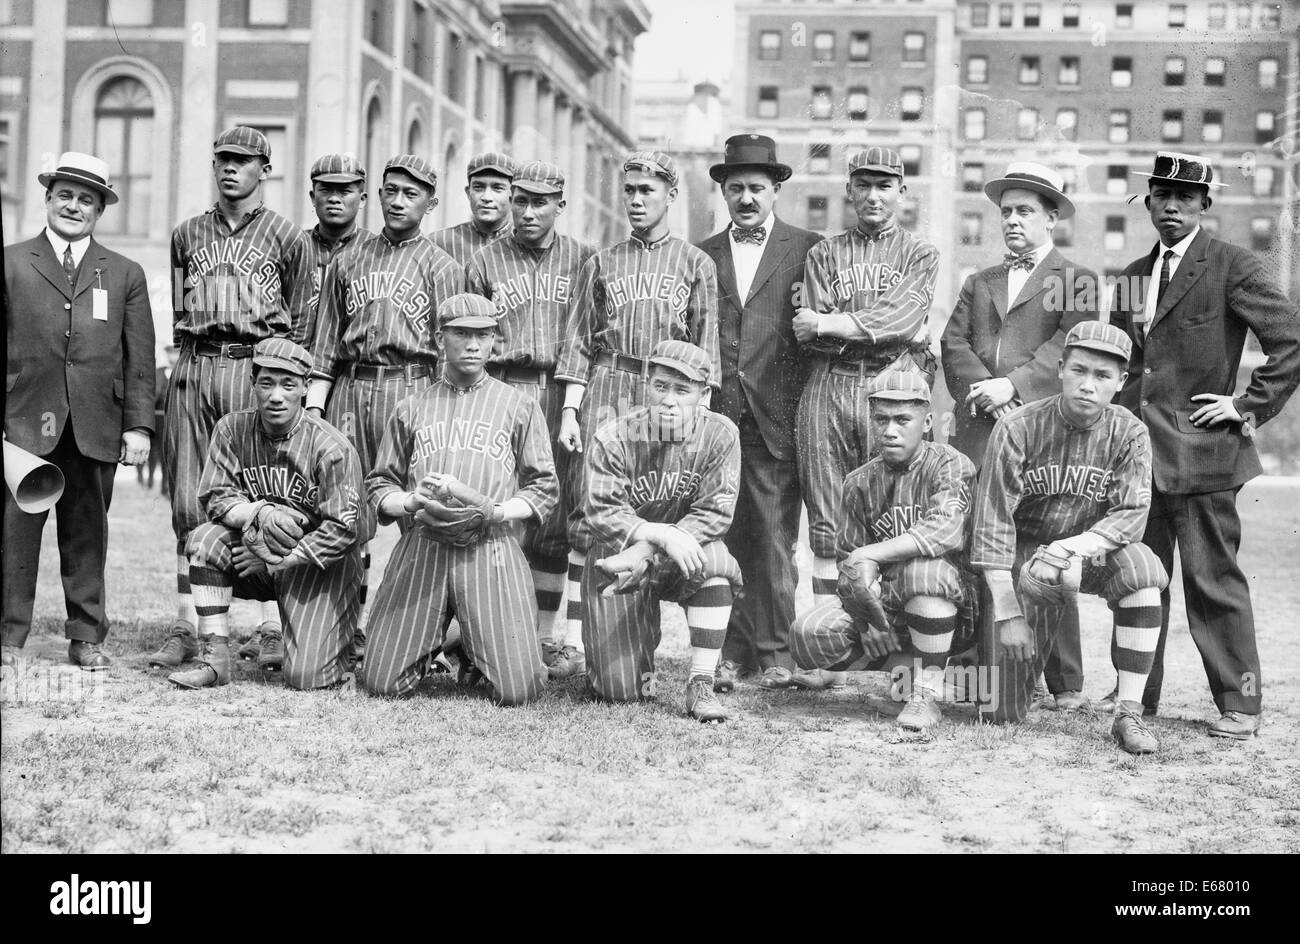 Chinese American baseball team from Hawaii which came to the United States to play against university teams. This team played Columbia University's team on May 31, 1914. Stock Photo